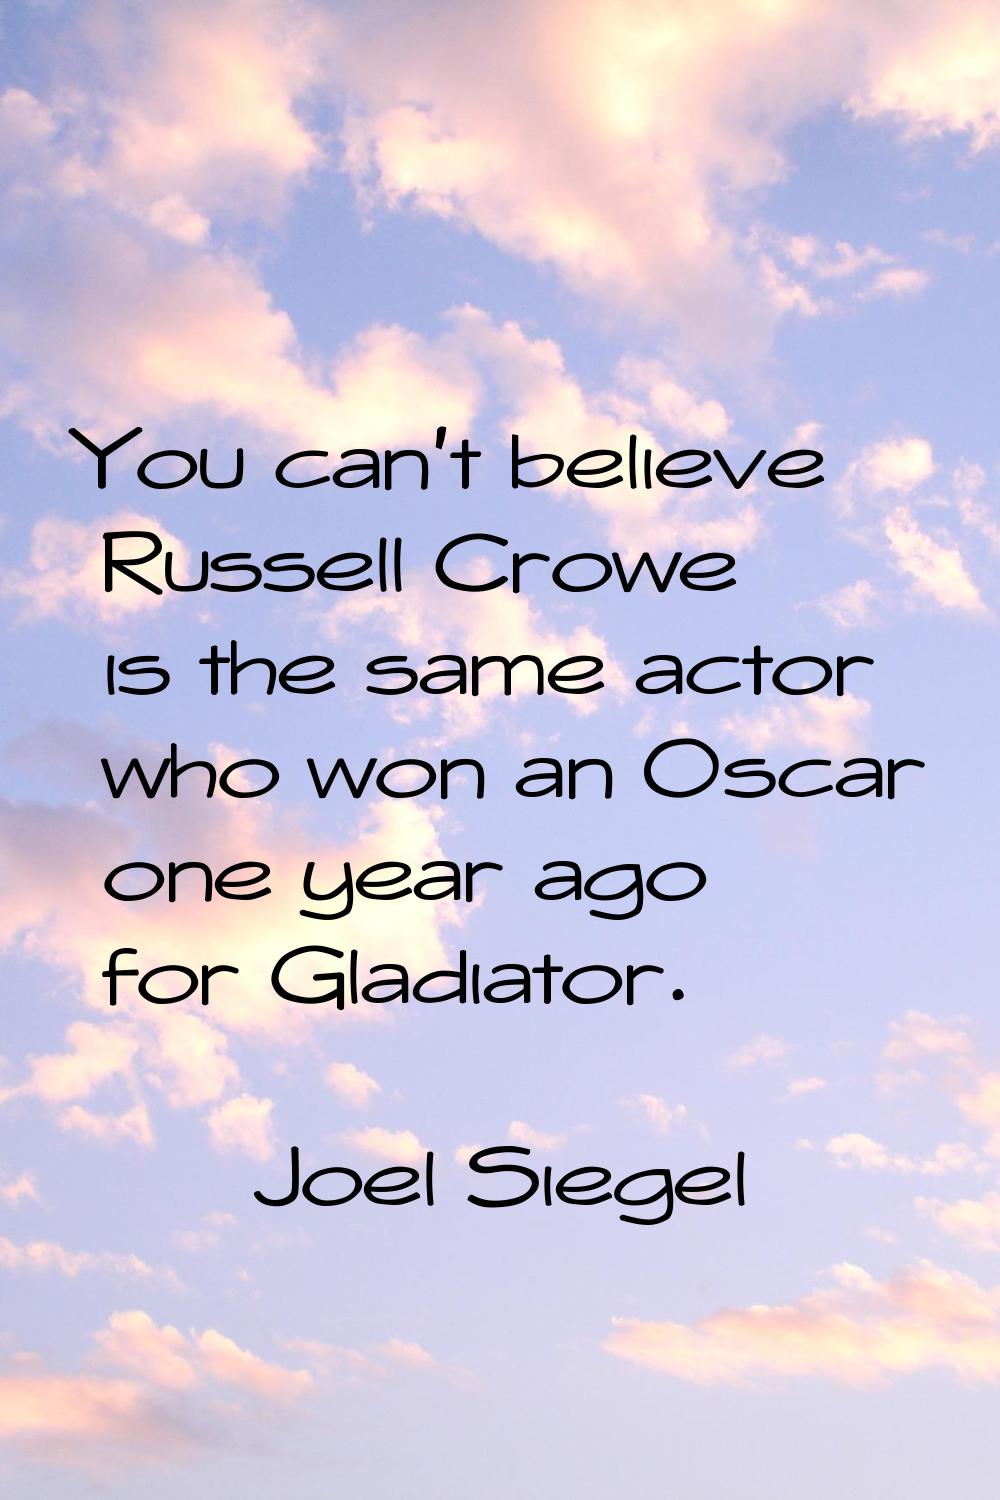 You can't believe Russell Crowe is the same actor who won an Oscar one year ago for Gladiator.